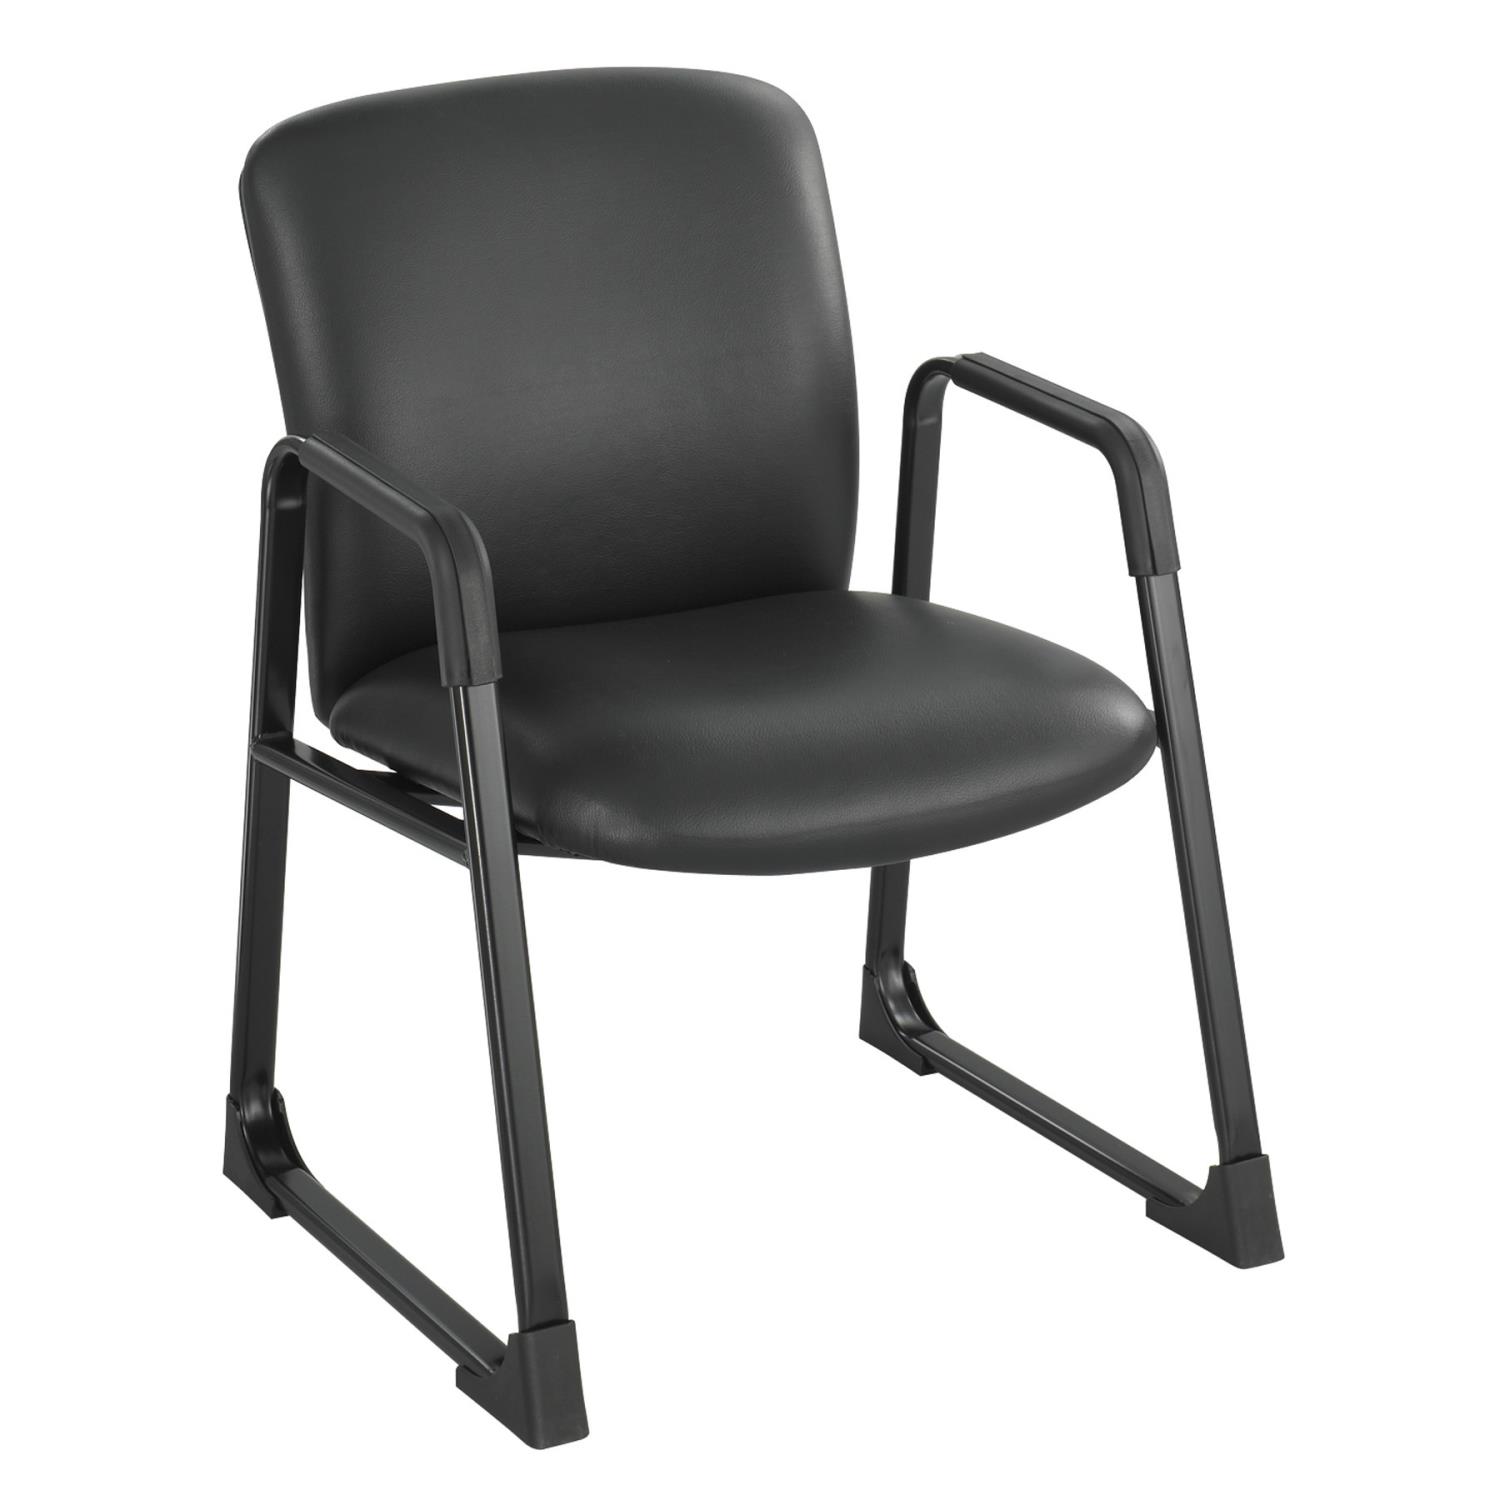 Safco Products Safco Uber Guest Chair In Black Finish 3492BV